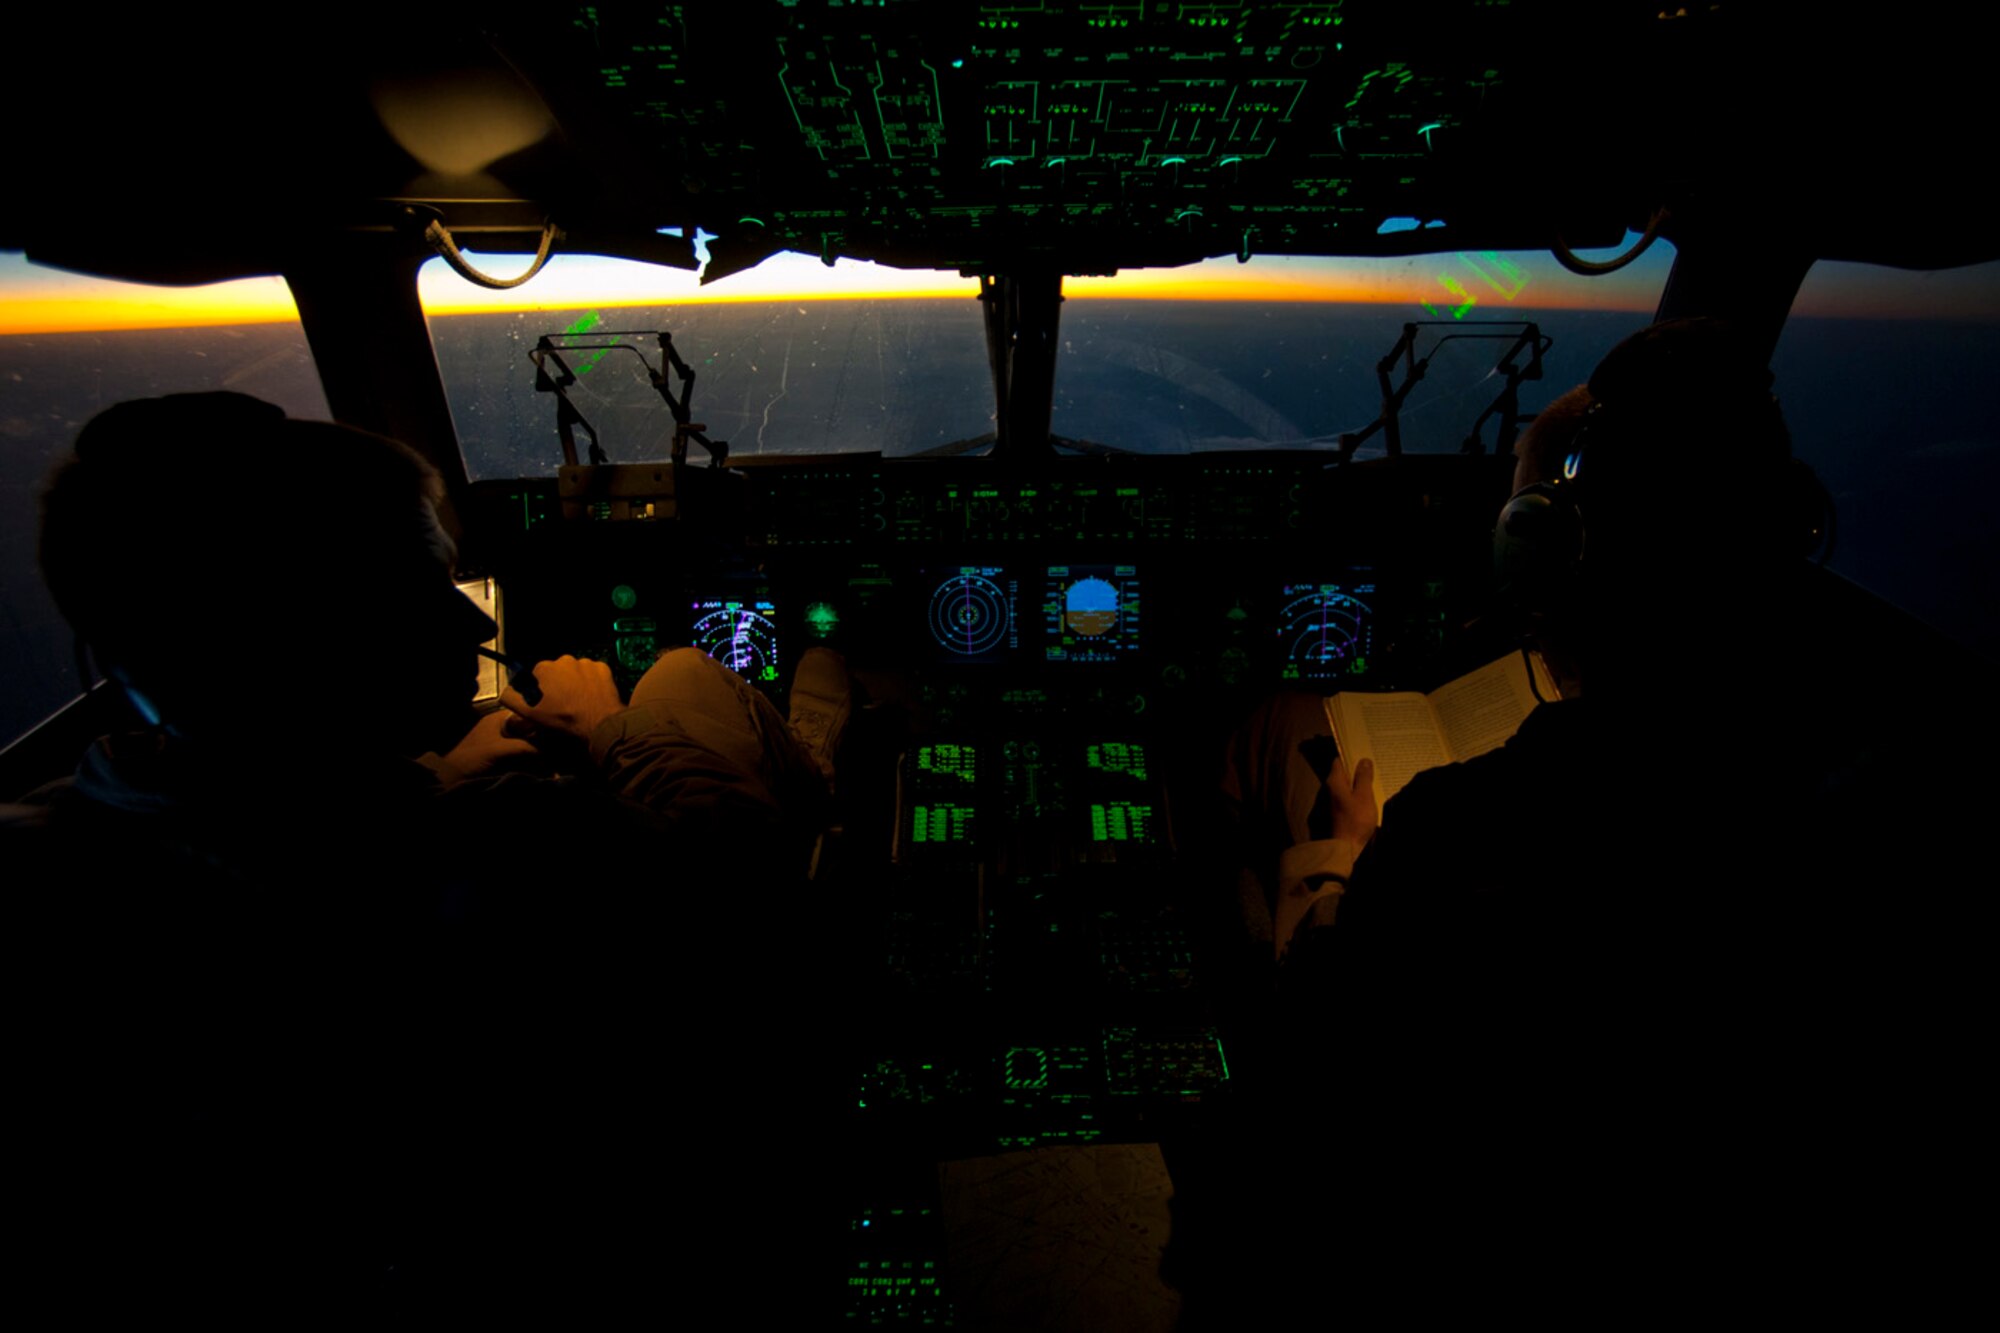 Capts. Matt Hammerle, left, and Eric Bowers, 817th Expeditionary Airlift Squadron pilots, reference flight material onboard a C-17 Globemaster III aircraft Aug. 18, 2011, while flying over Afghanistan. The crew transported equipment and supplies from Incirlik Air Base, Turkey, to Kandahar Air Field, Afghanistan. (U.S. Air Force photo by Tech. Sgt. Michael B. Keller/Released)